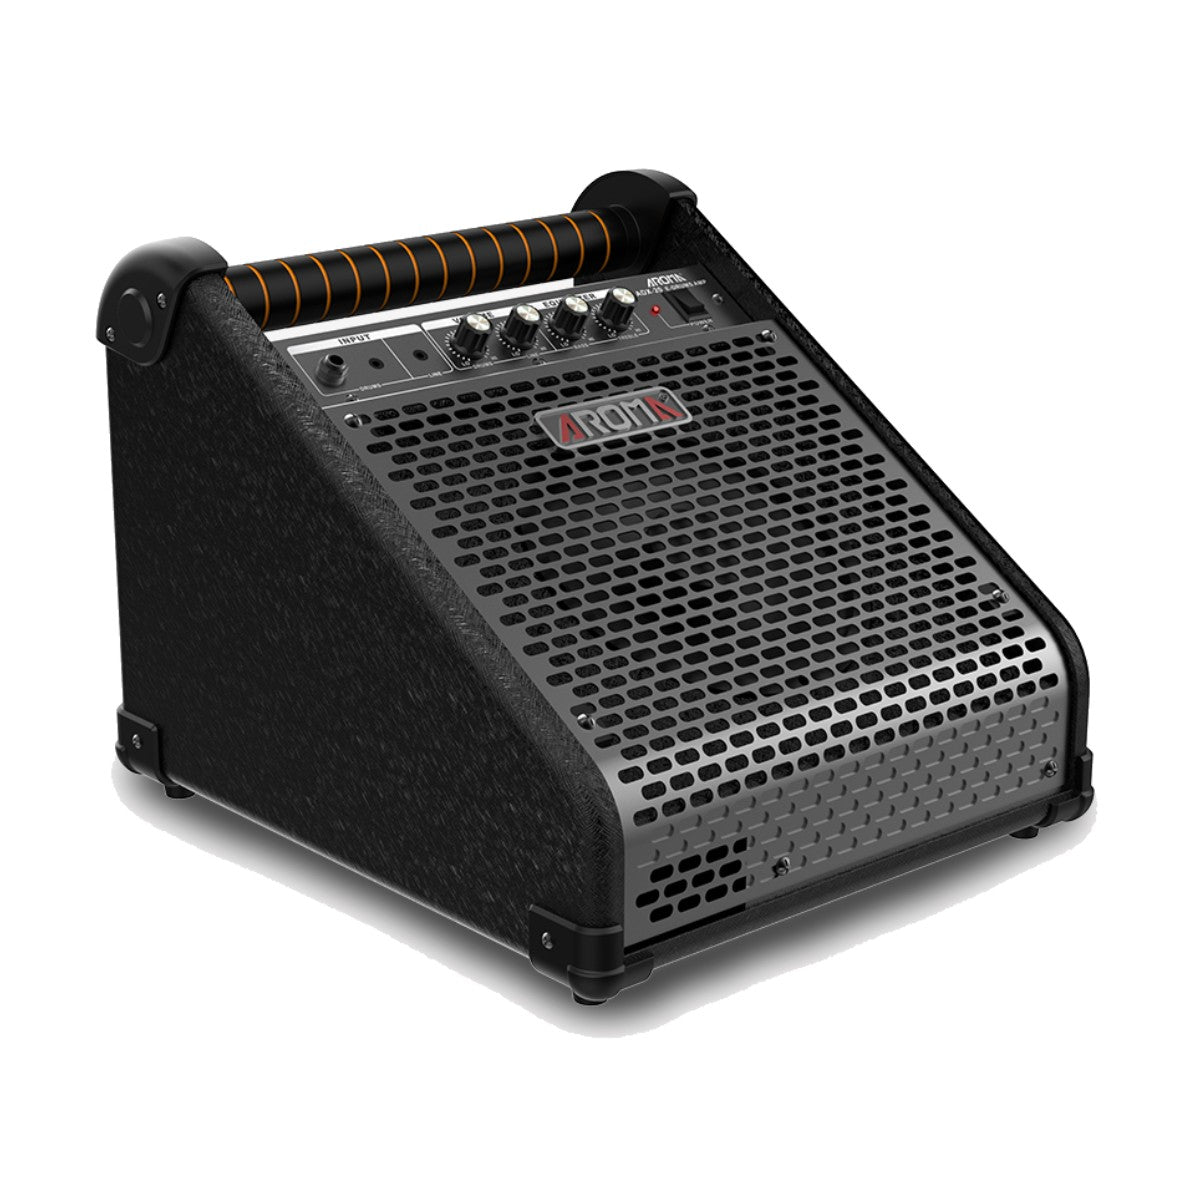 Amplifier Aroma ADX20, Combo - Việt Music